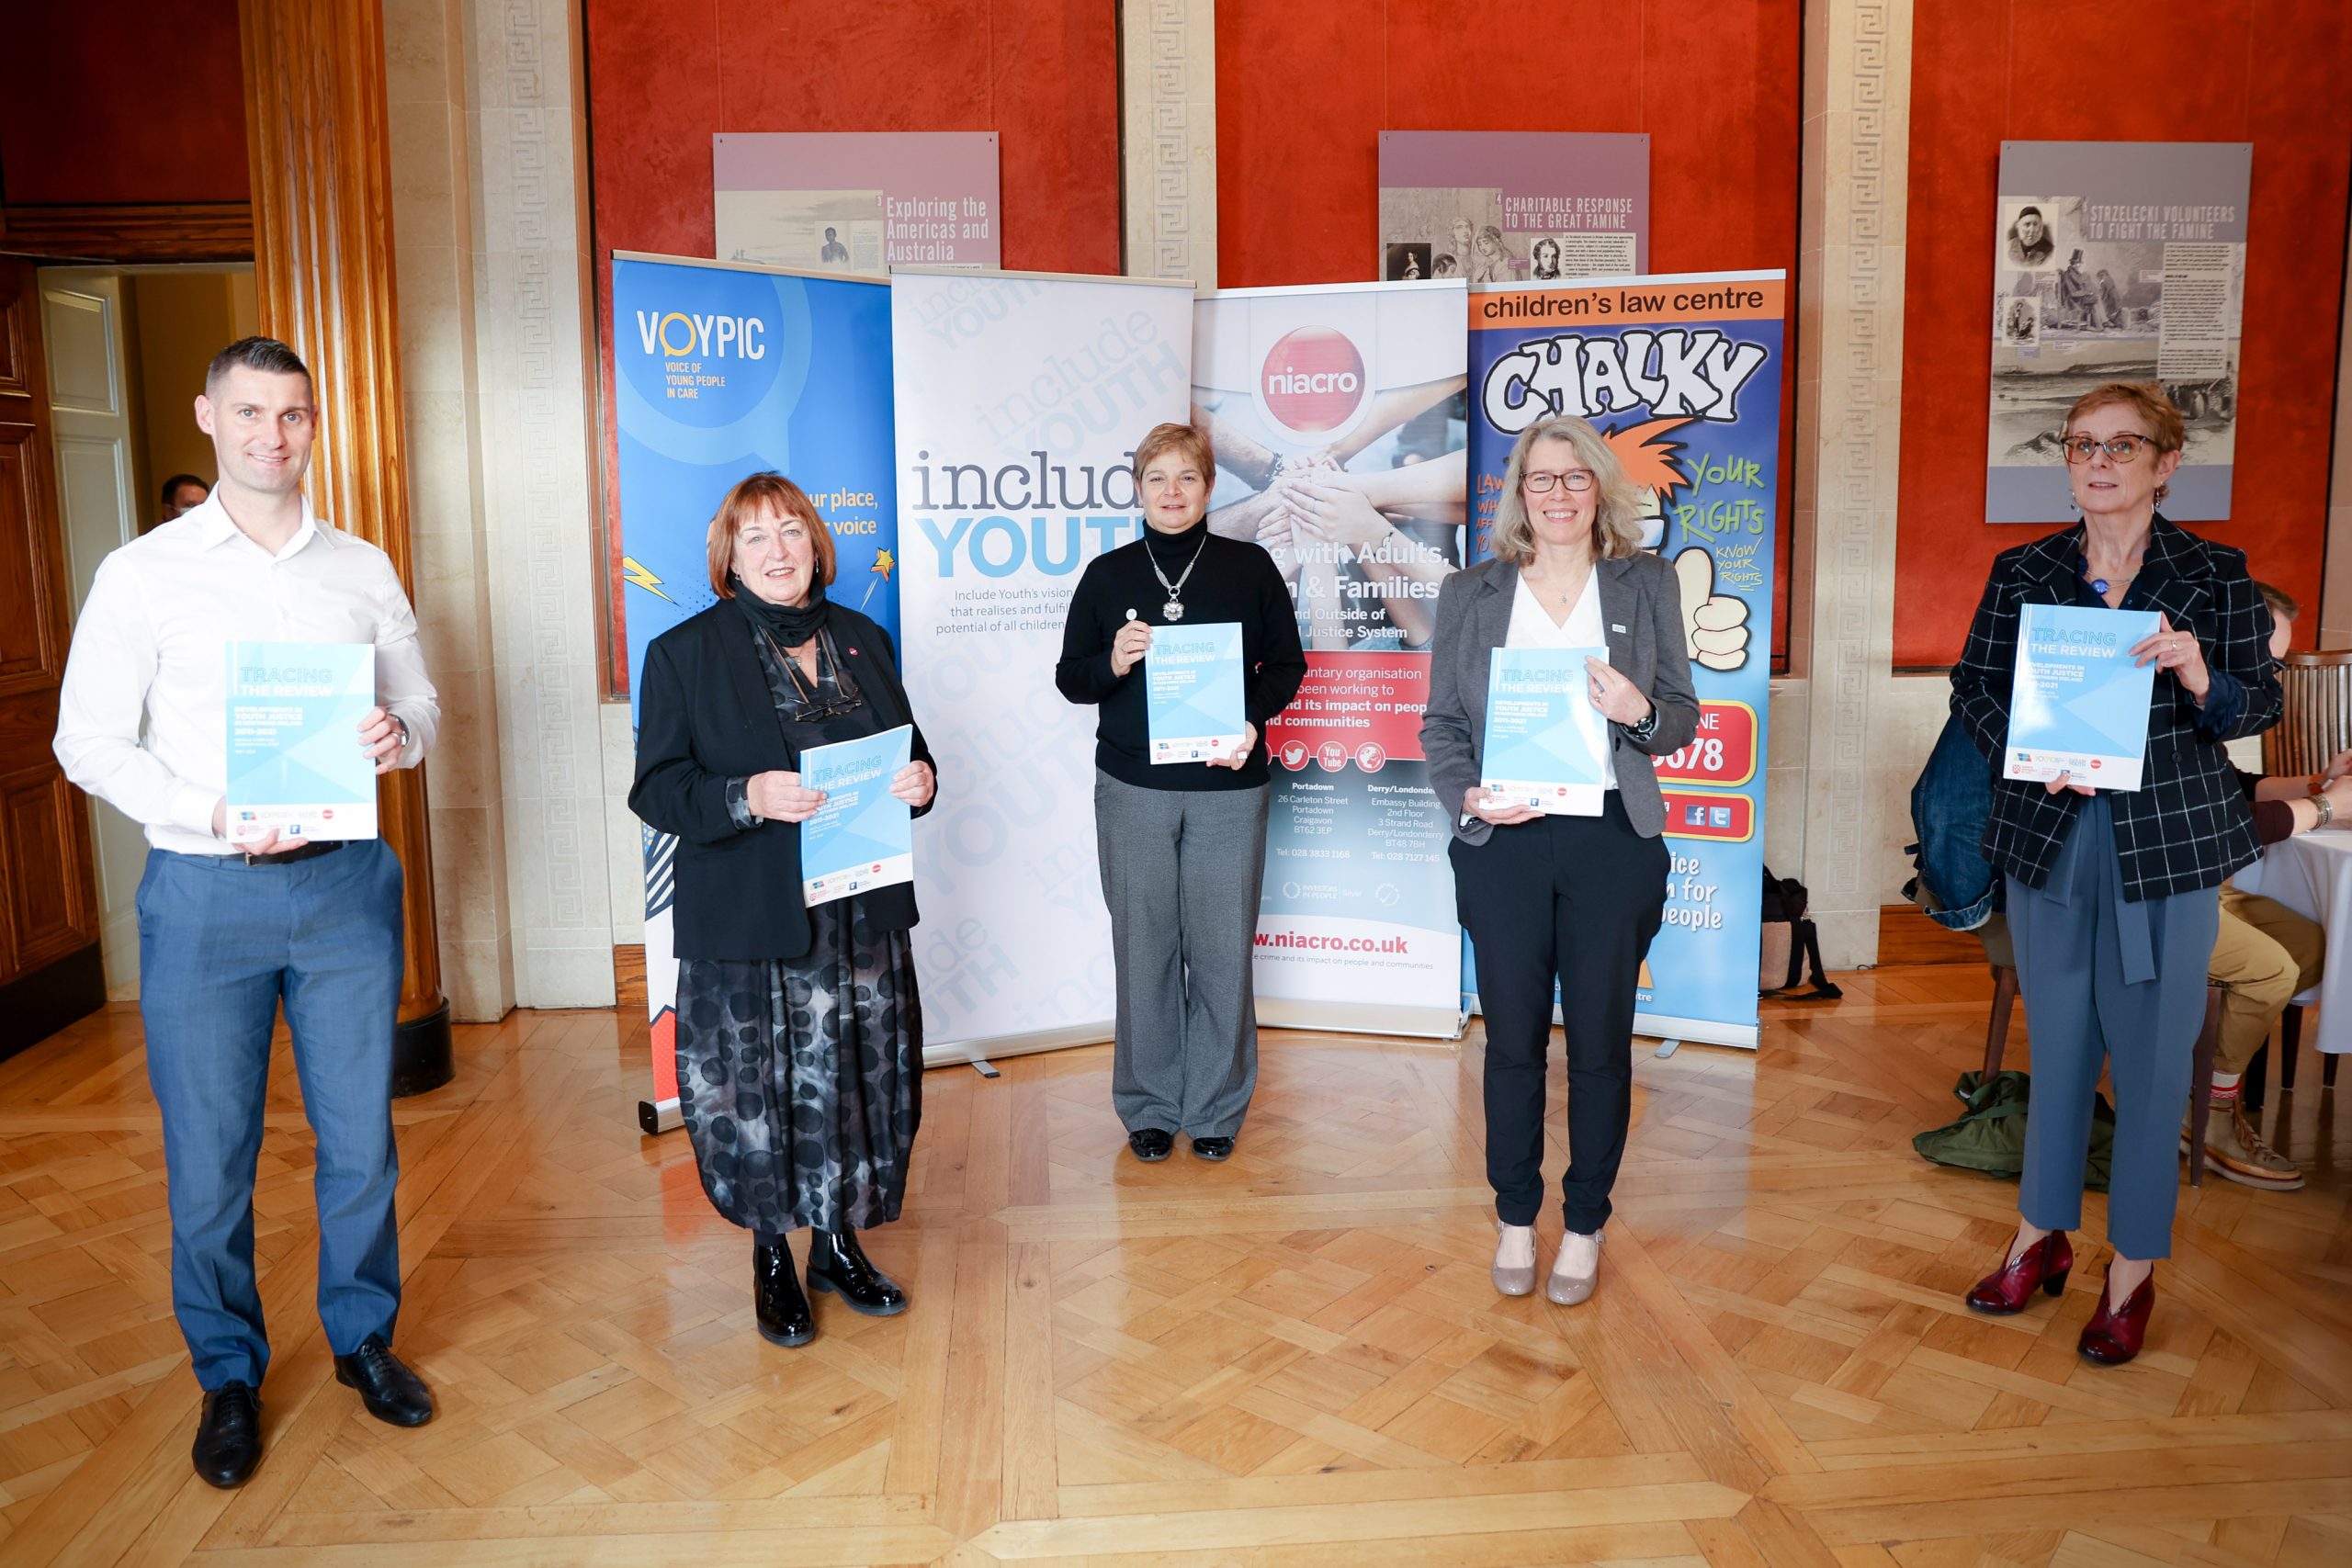 Northern Ireland Commissioner for Children and Young People, Koulla Yiasouma, joins Paul McCafferty (VOYPIC), Olwen Lyner (NIACRO), Paula Rodgers (Include Youth) and Paddy Kelly (Children's Law Centre) at the launch of 'Tracing the Review'.